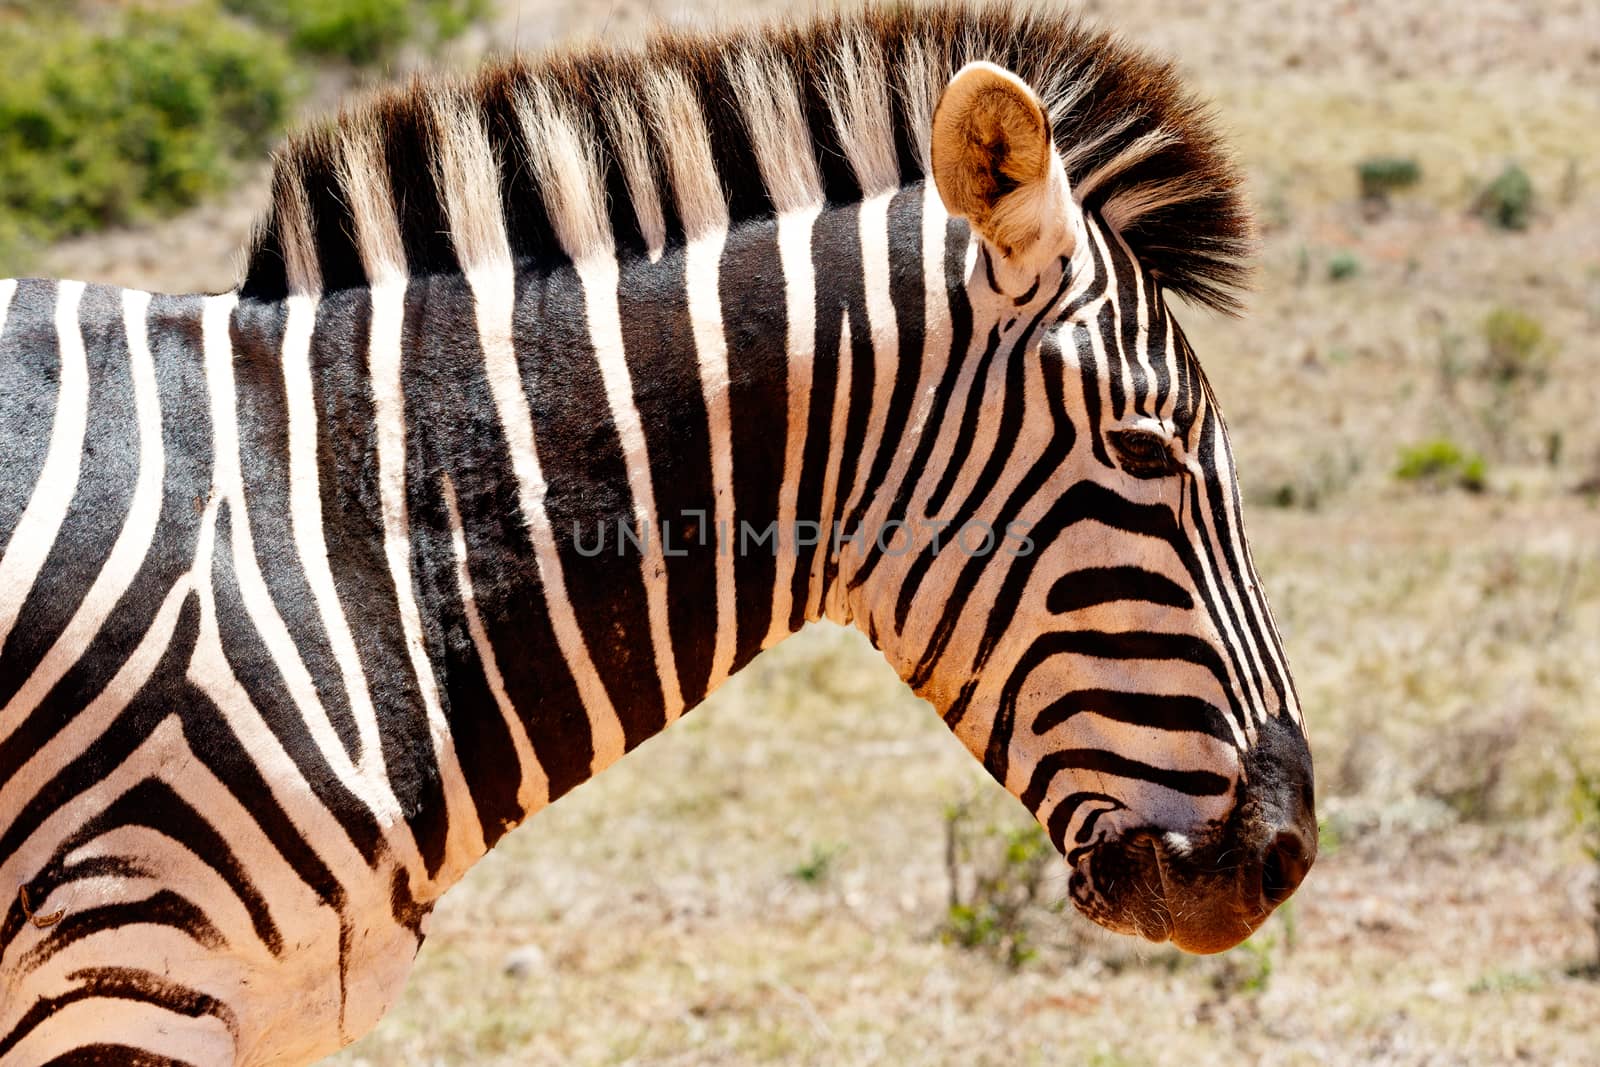 Zebra standing in the field and looking down.